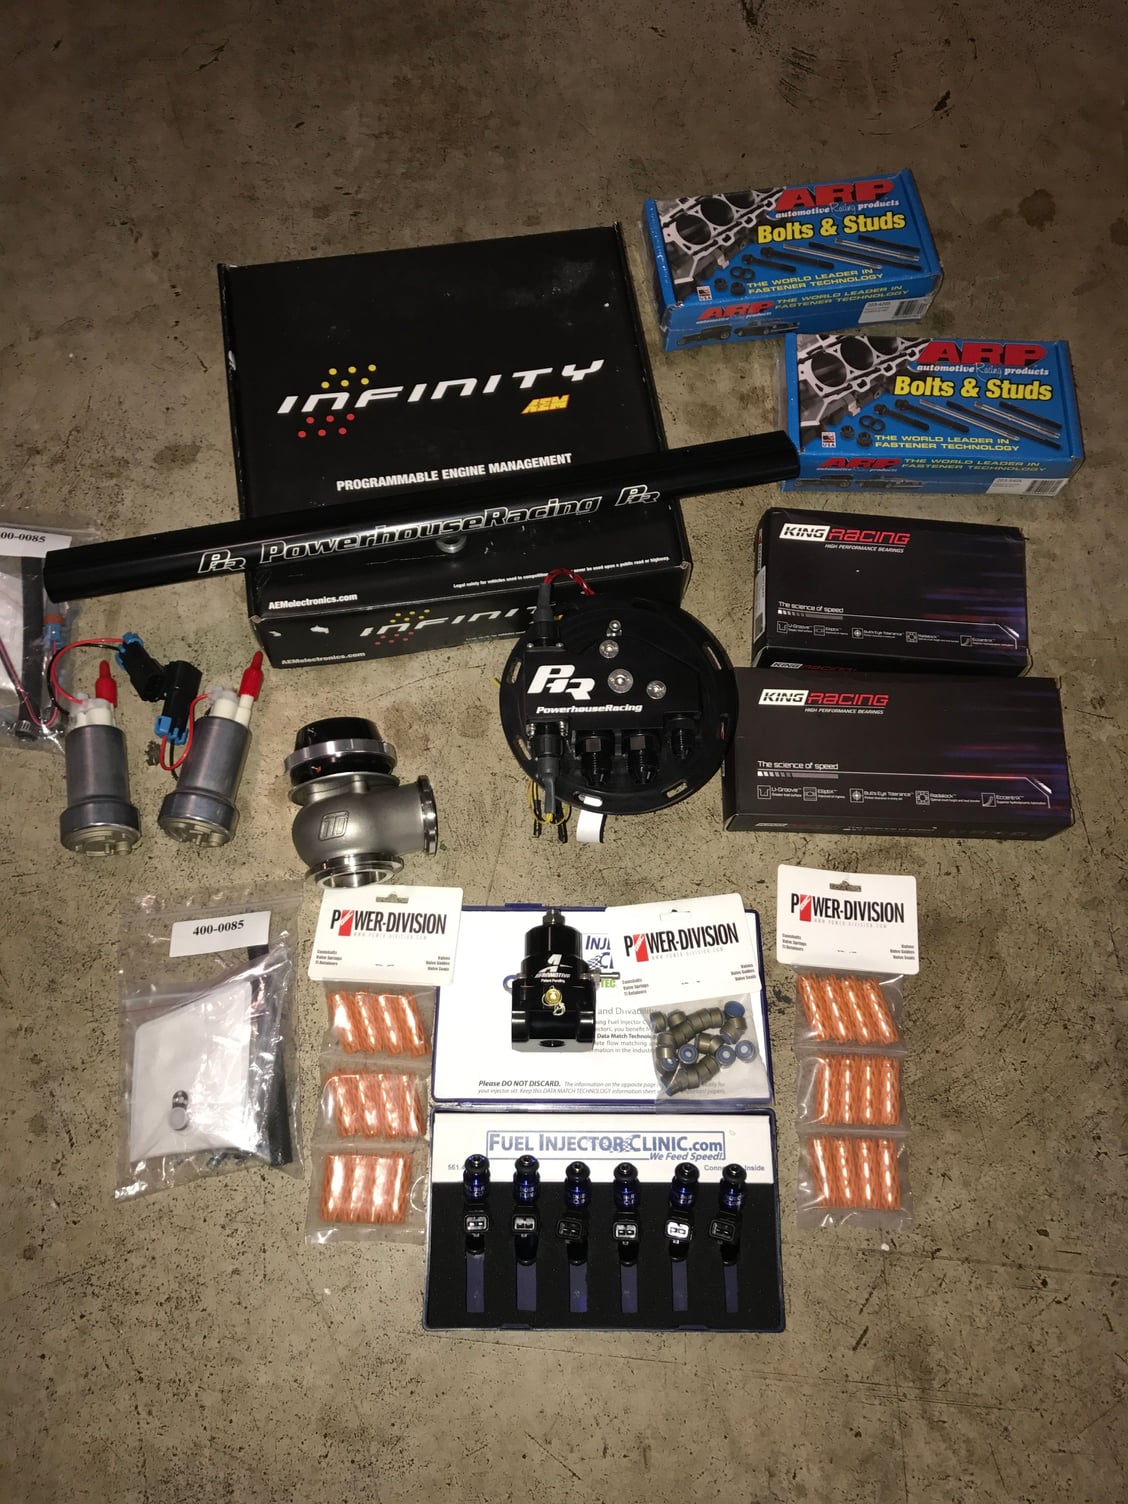 Miscellaneous - MEGA 2jz Parts Sale, CCW, Grannas Racing, QUALITY - New - All Years Any Make All Models - Ashland, VA 23005, United States